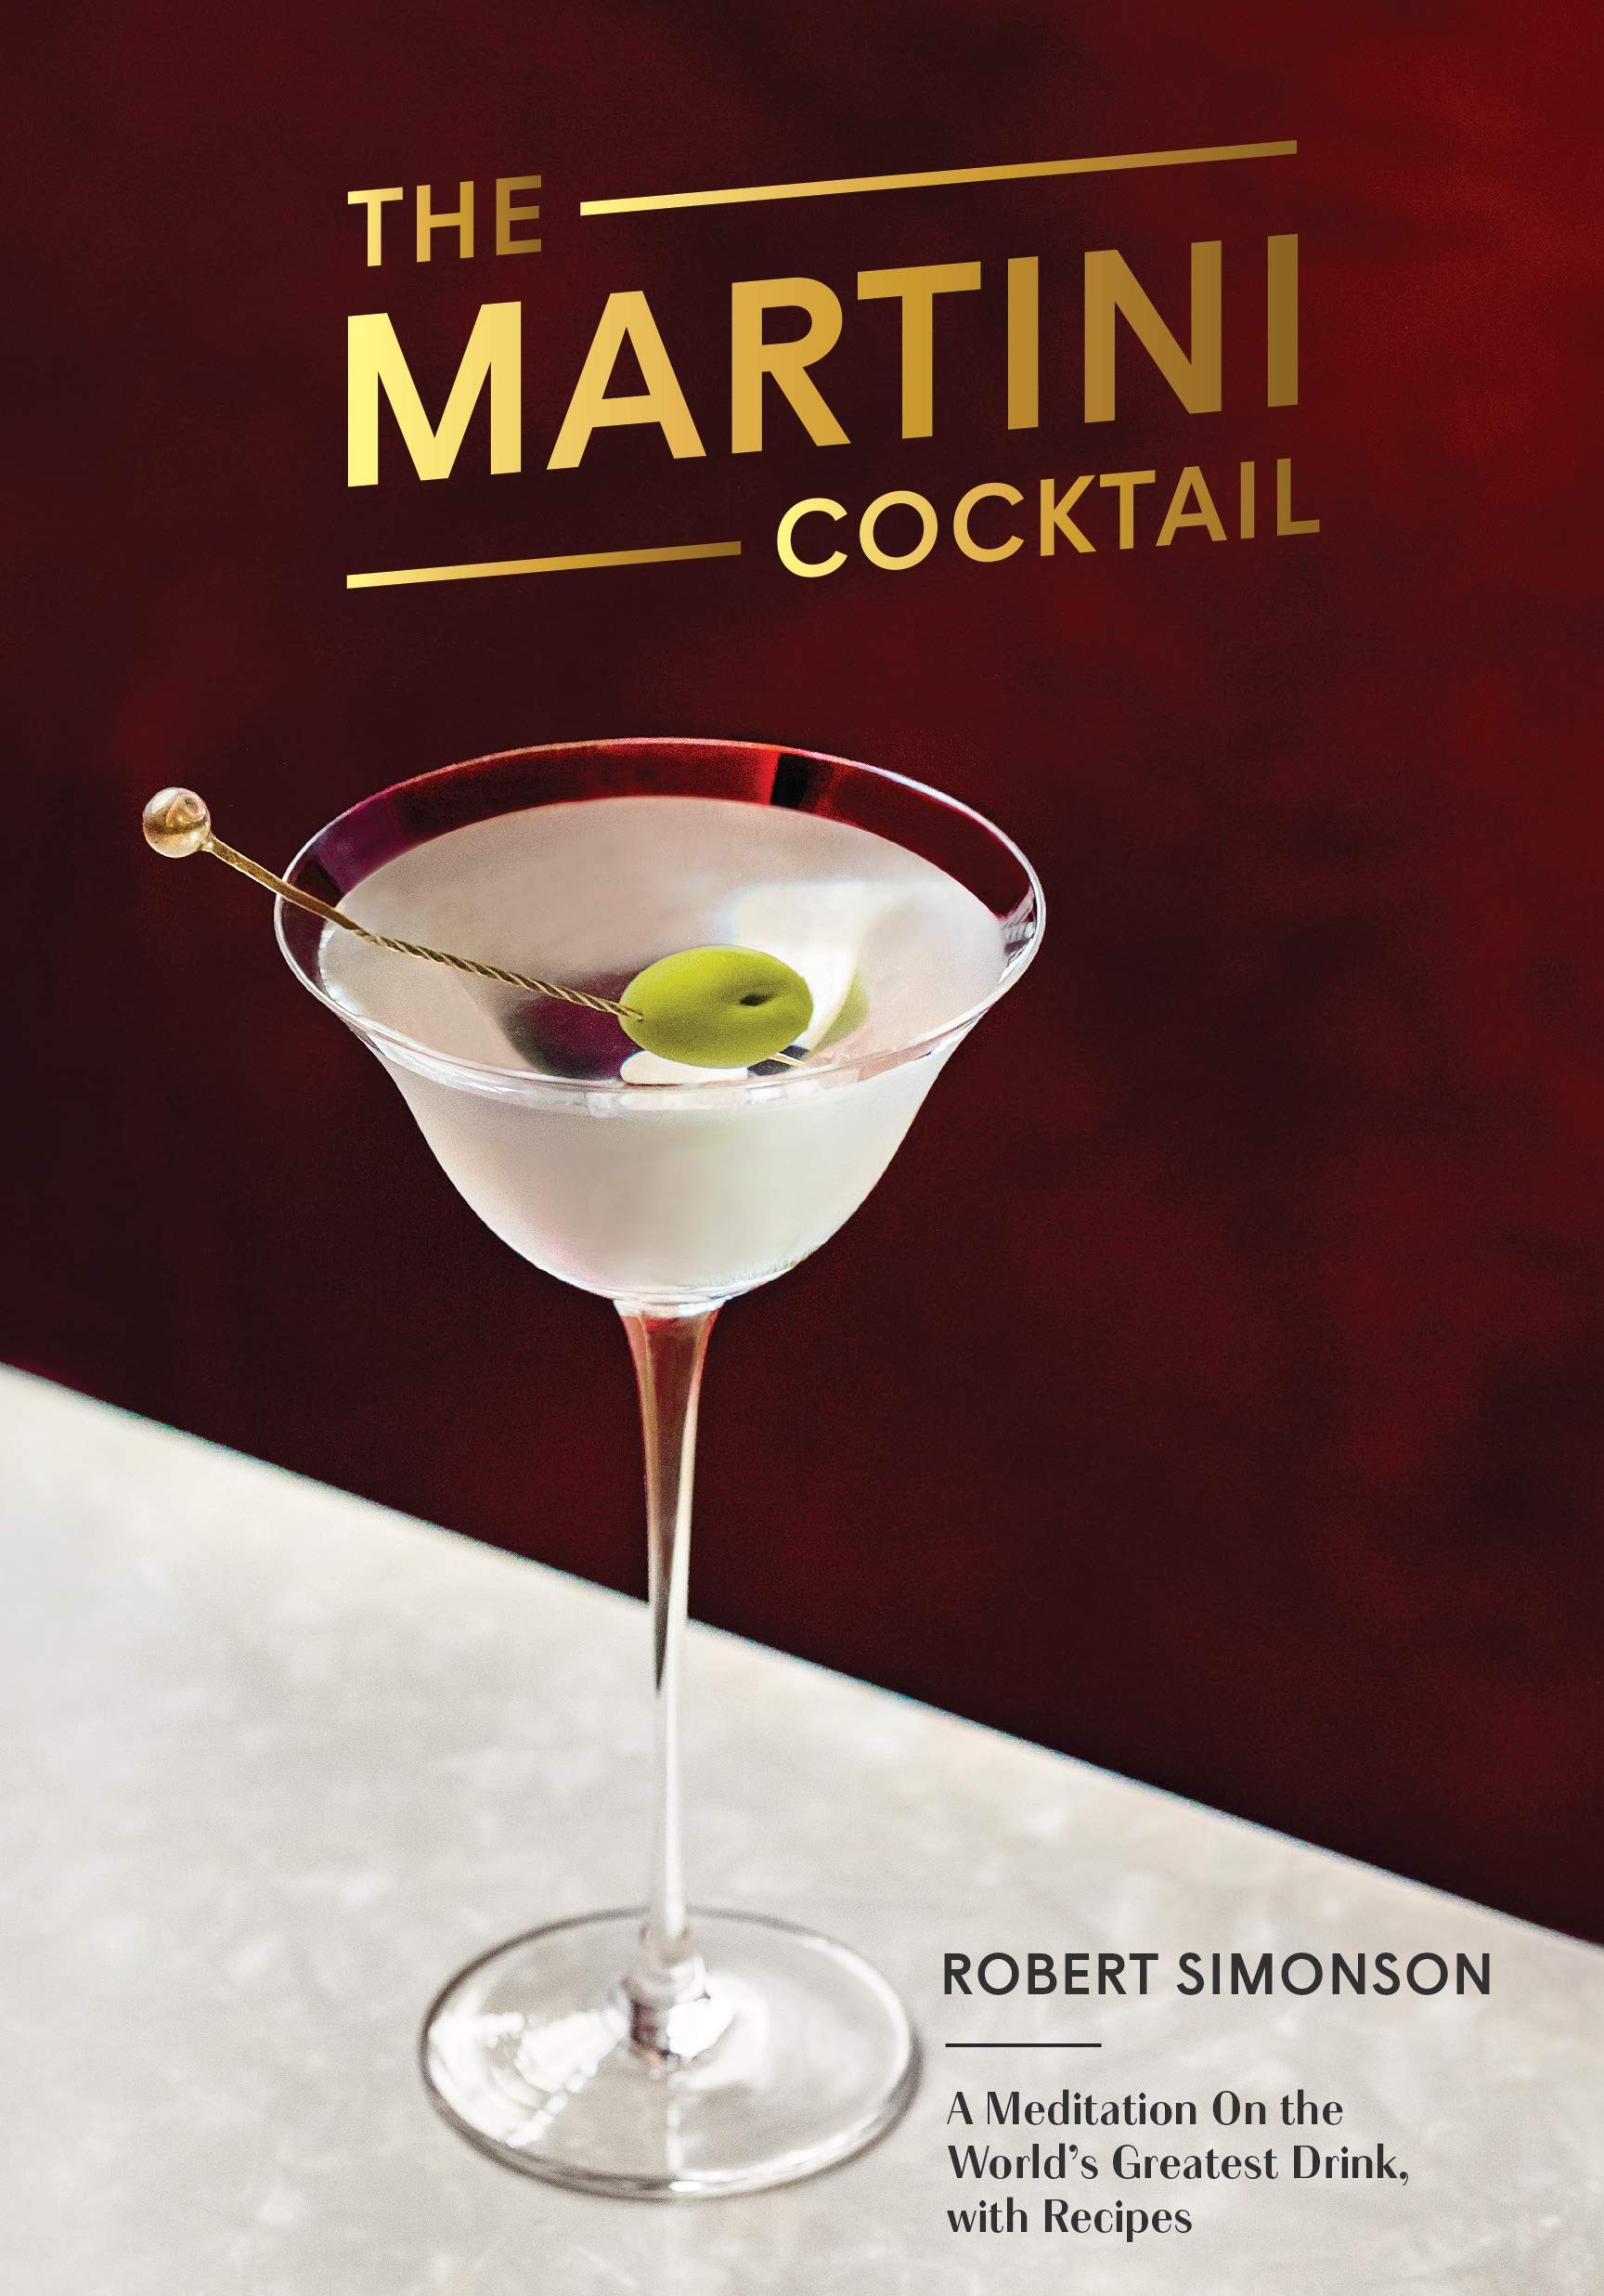 The Martini Cocktail: A Meditation on the World's Greatest Drink, with Recipes (Robert Simonson) *Signed*